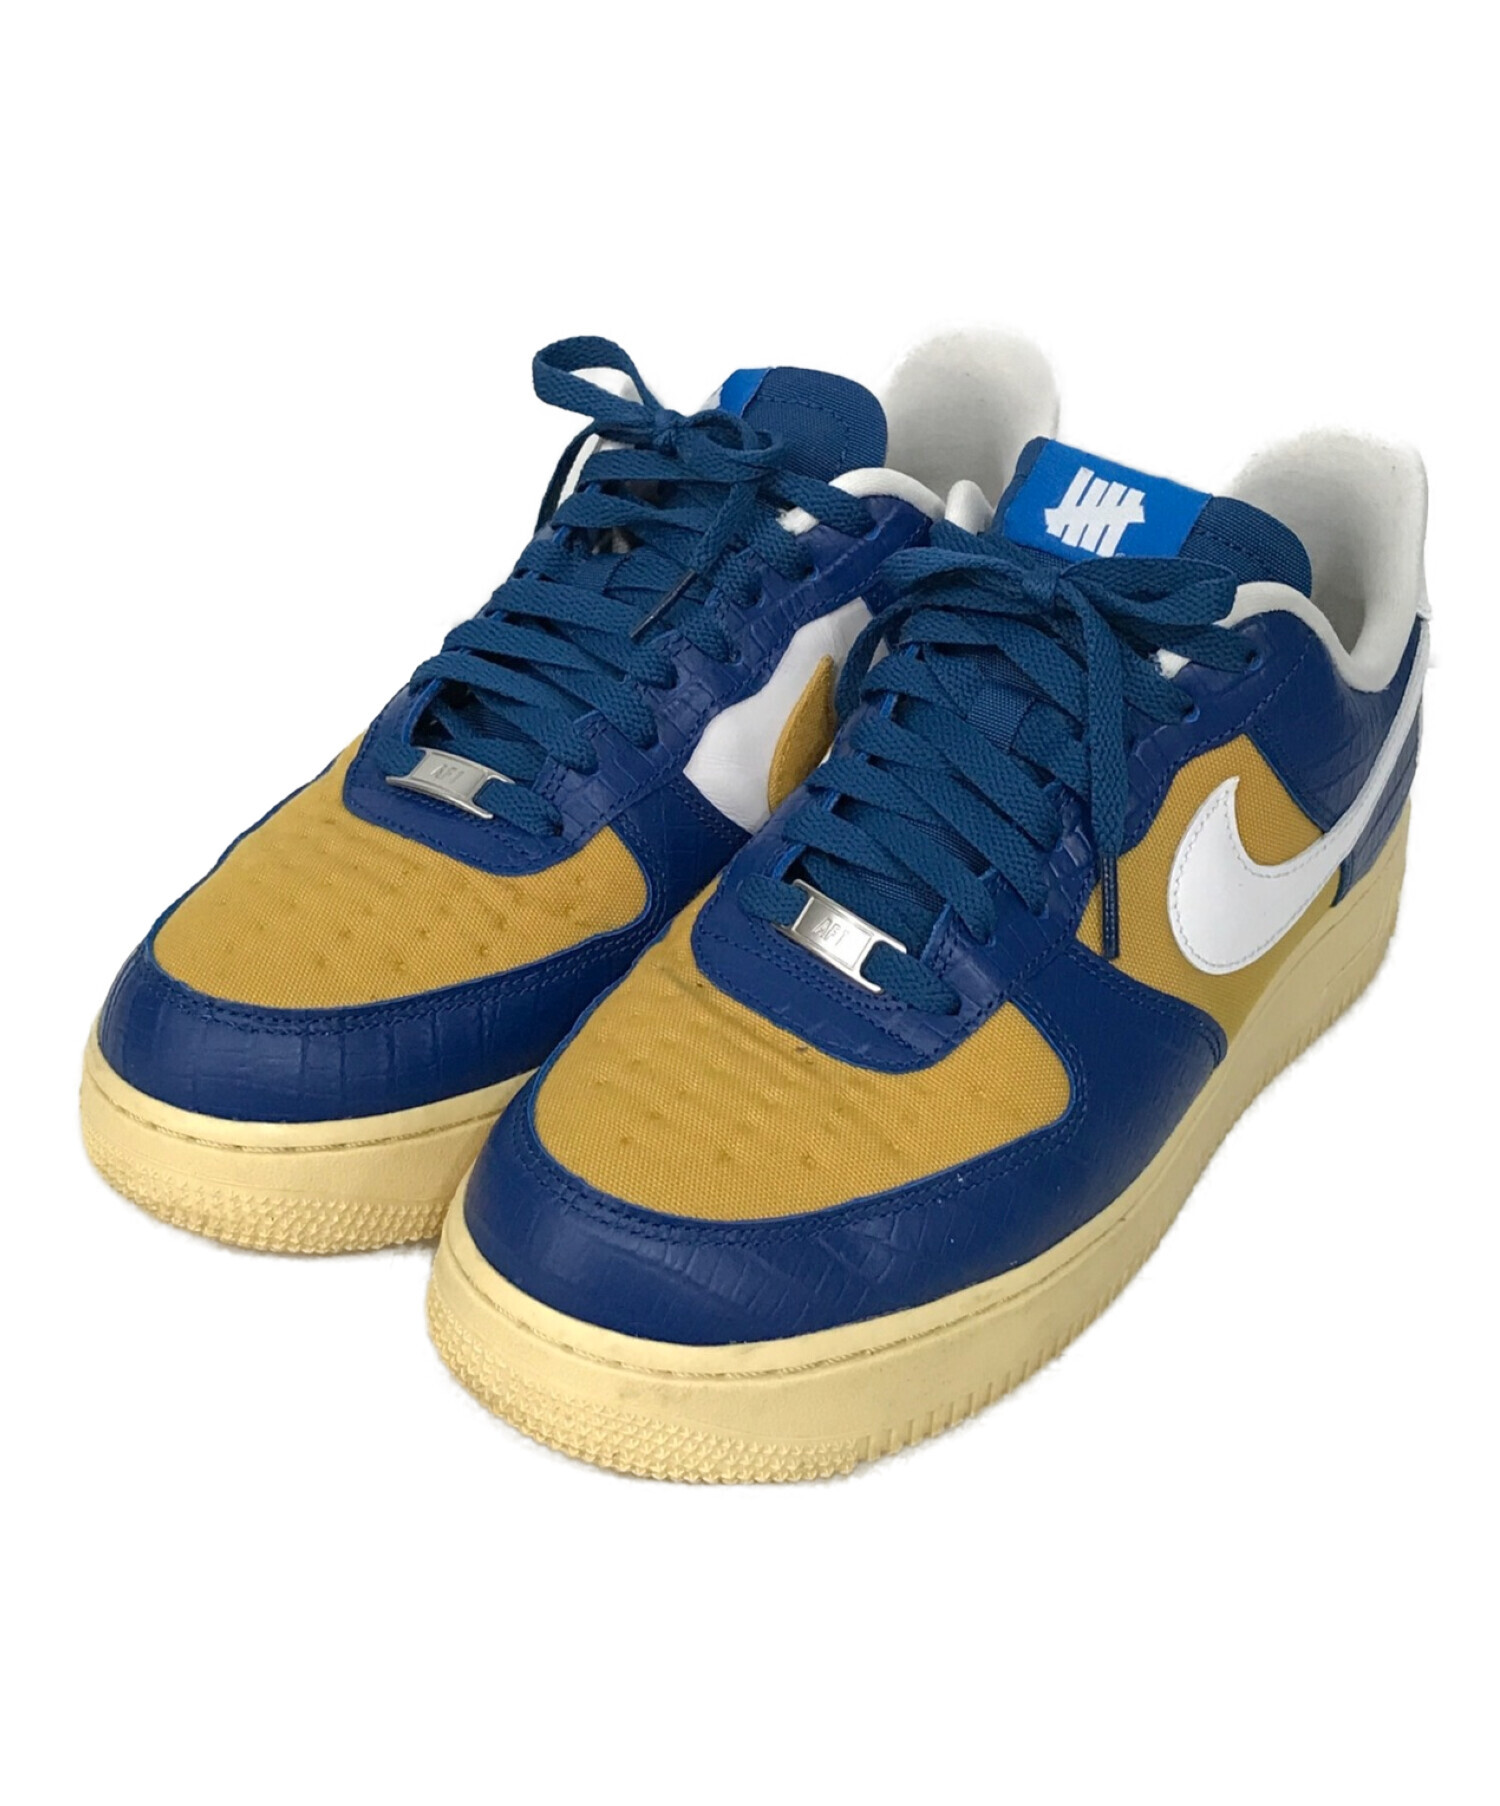 NIKE×UNDEFEATED (ナイキ×アンディフィーテッド) AIR FORCE 1 LOW SP　エアフォース ワン ロー SP  ブルー×イエロー サイズ:SIZE　US9